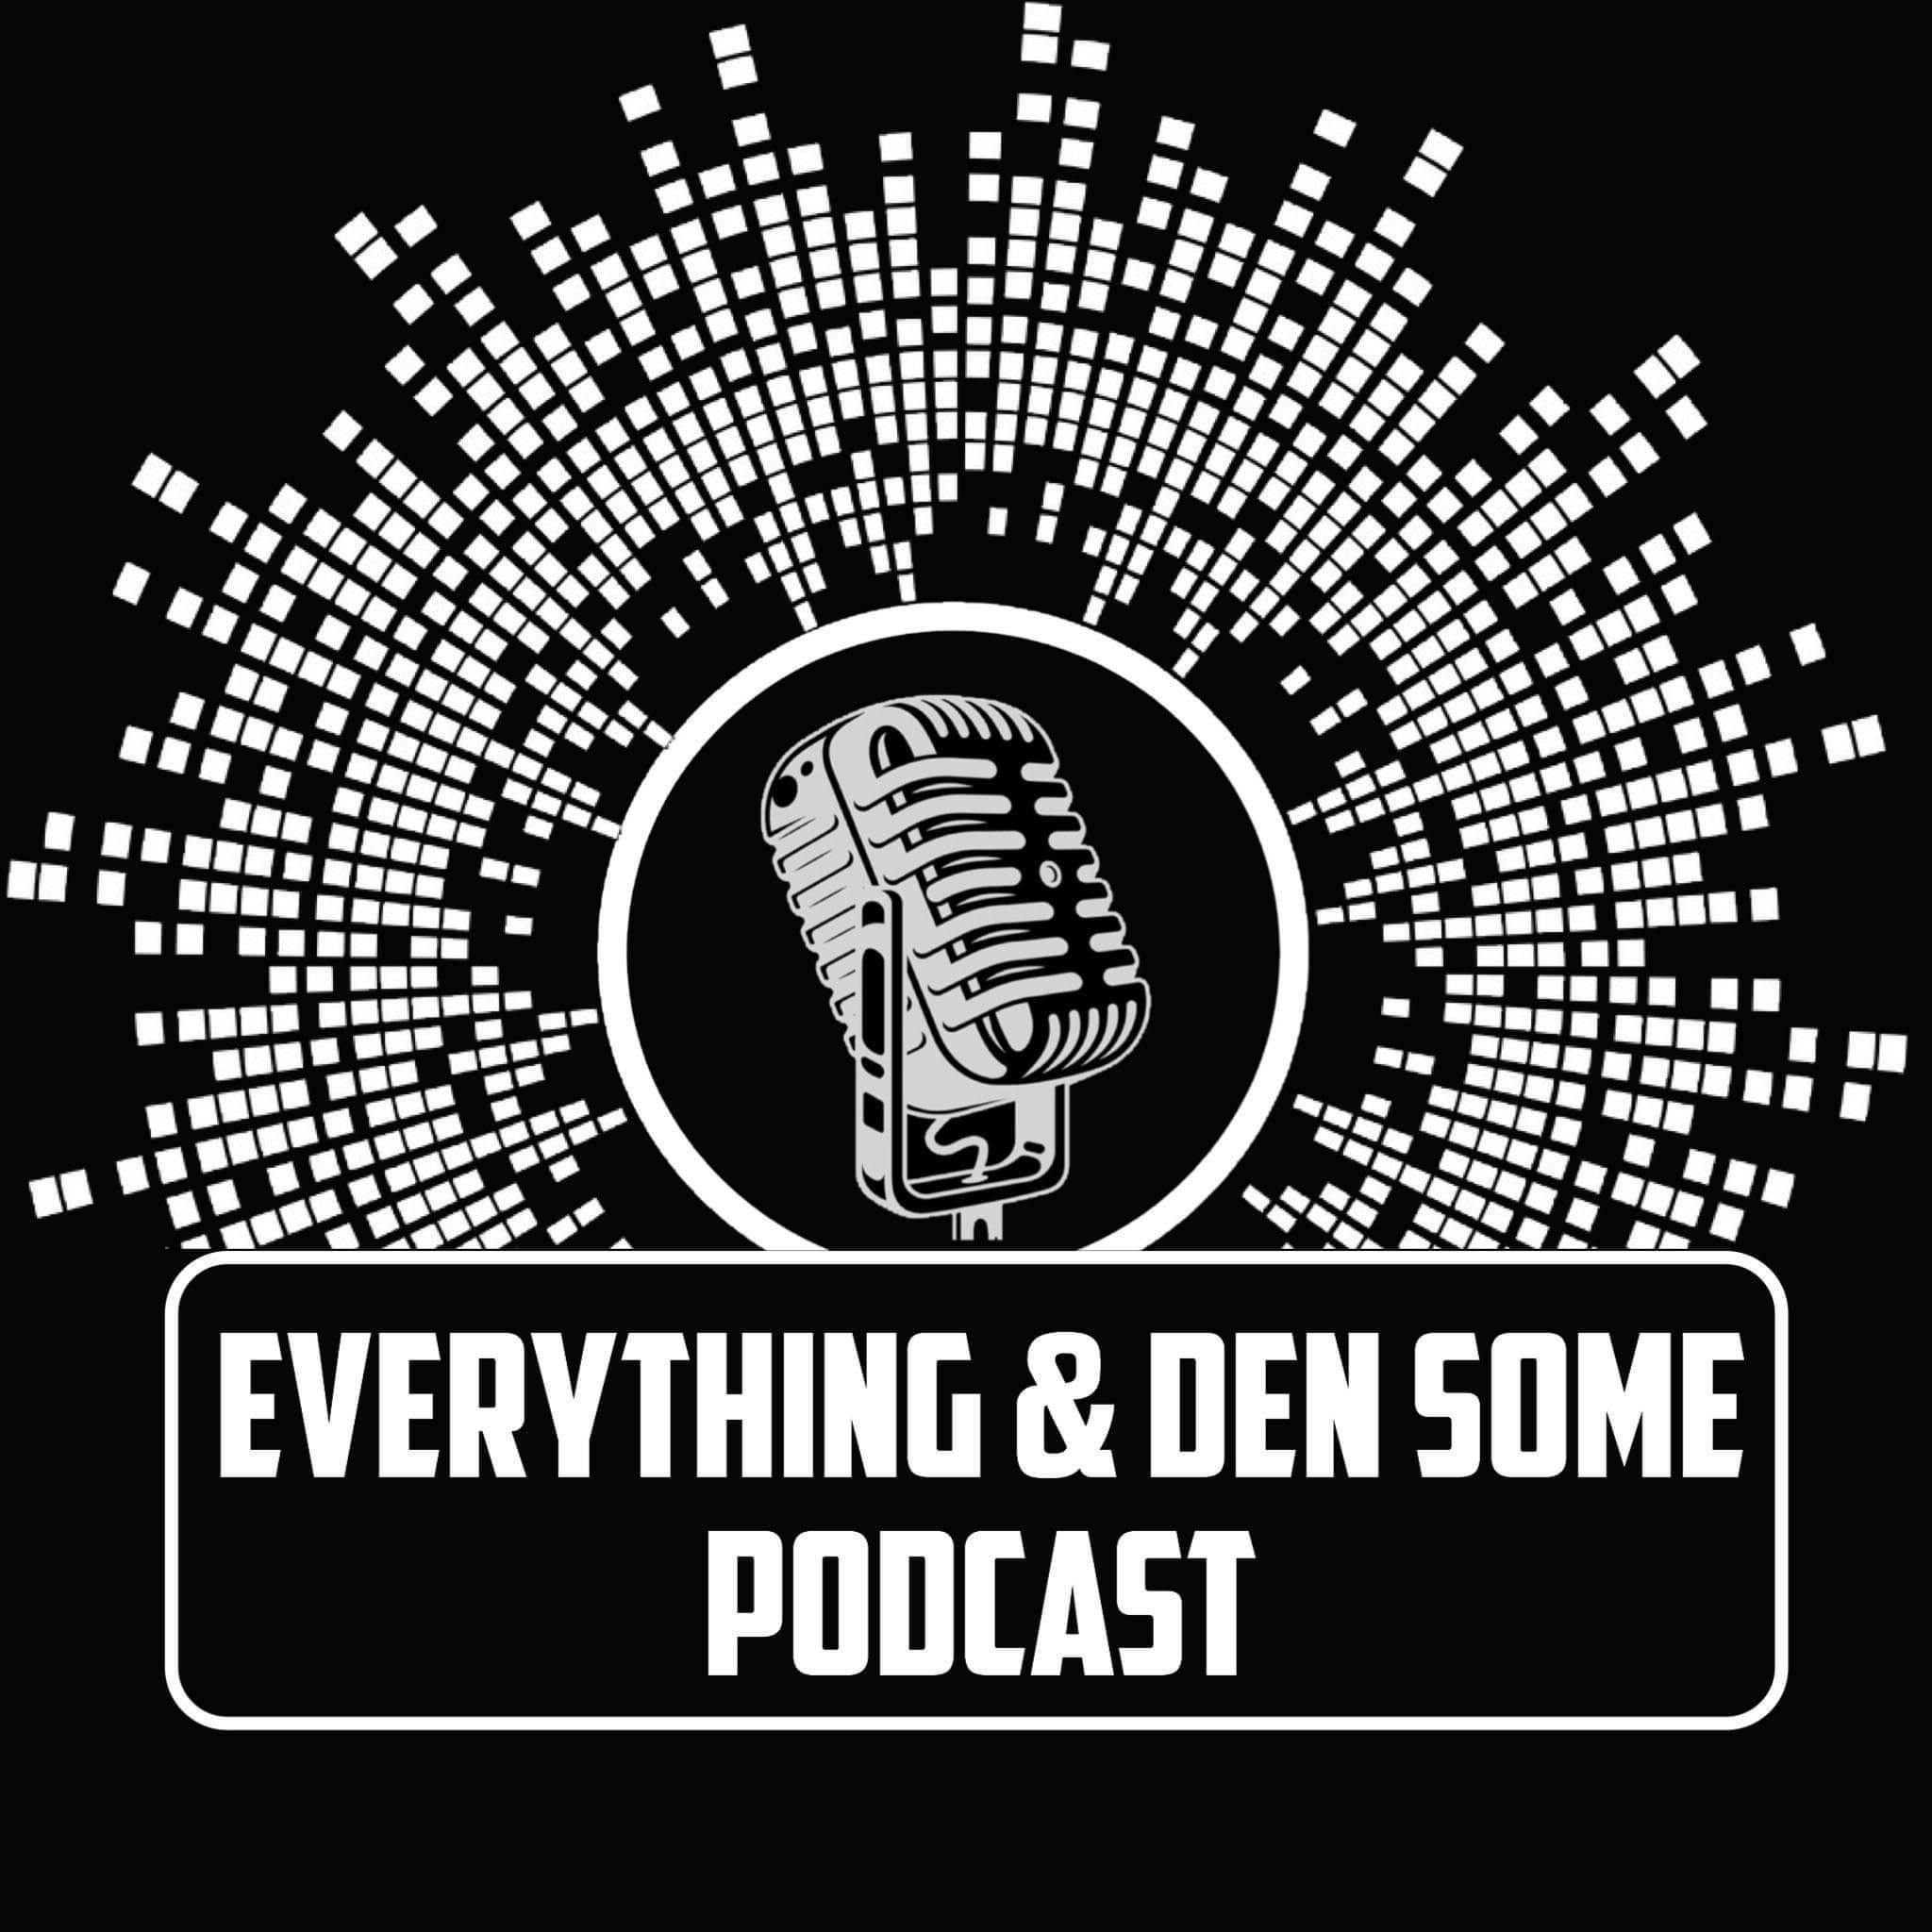 The Everything & Den Some Podcast